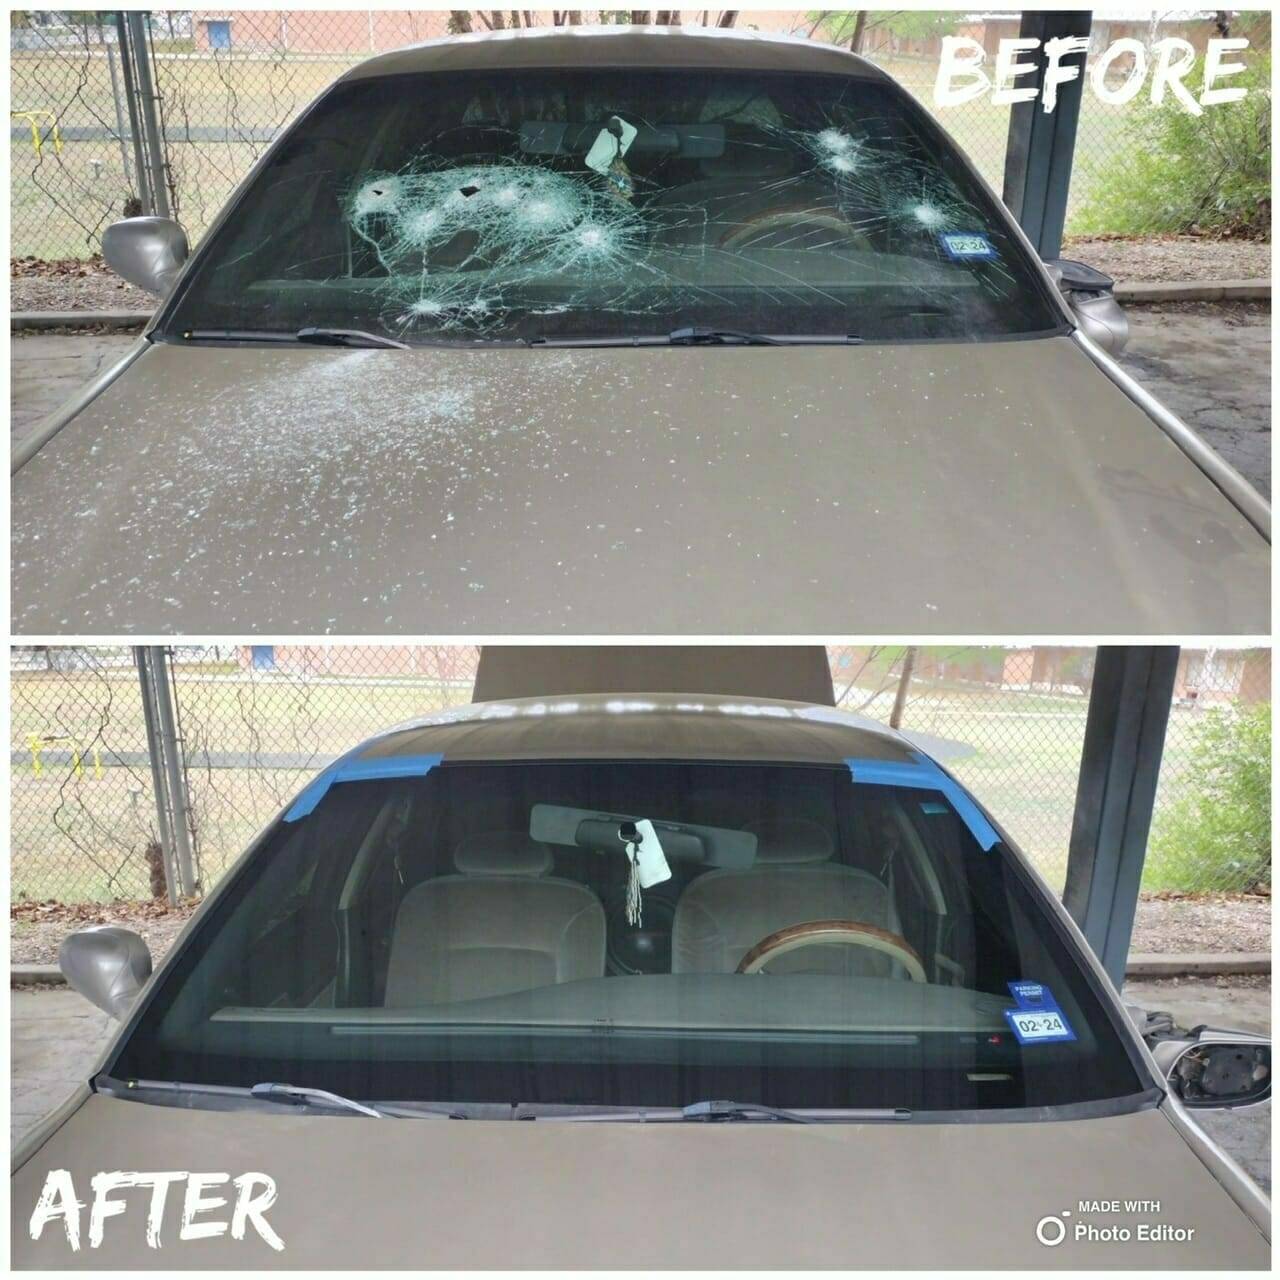 A split image illustrating a before-and-after view of a sedan's front windshield in China Grove, Texas. The top half reveals the initial damage with multiple points of impact on the broken front windshield. The bottom half displays the restored state of the windshield after a home auto glass appointment.